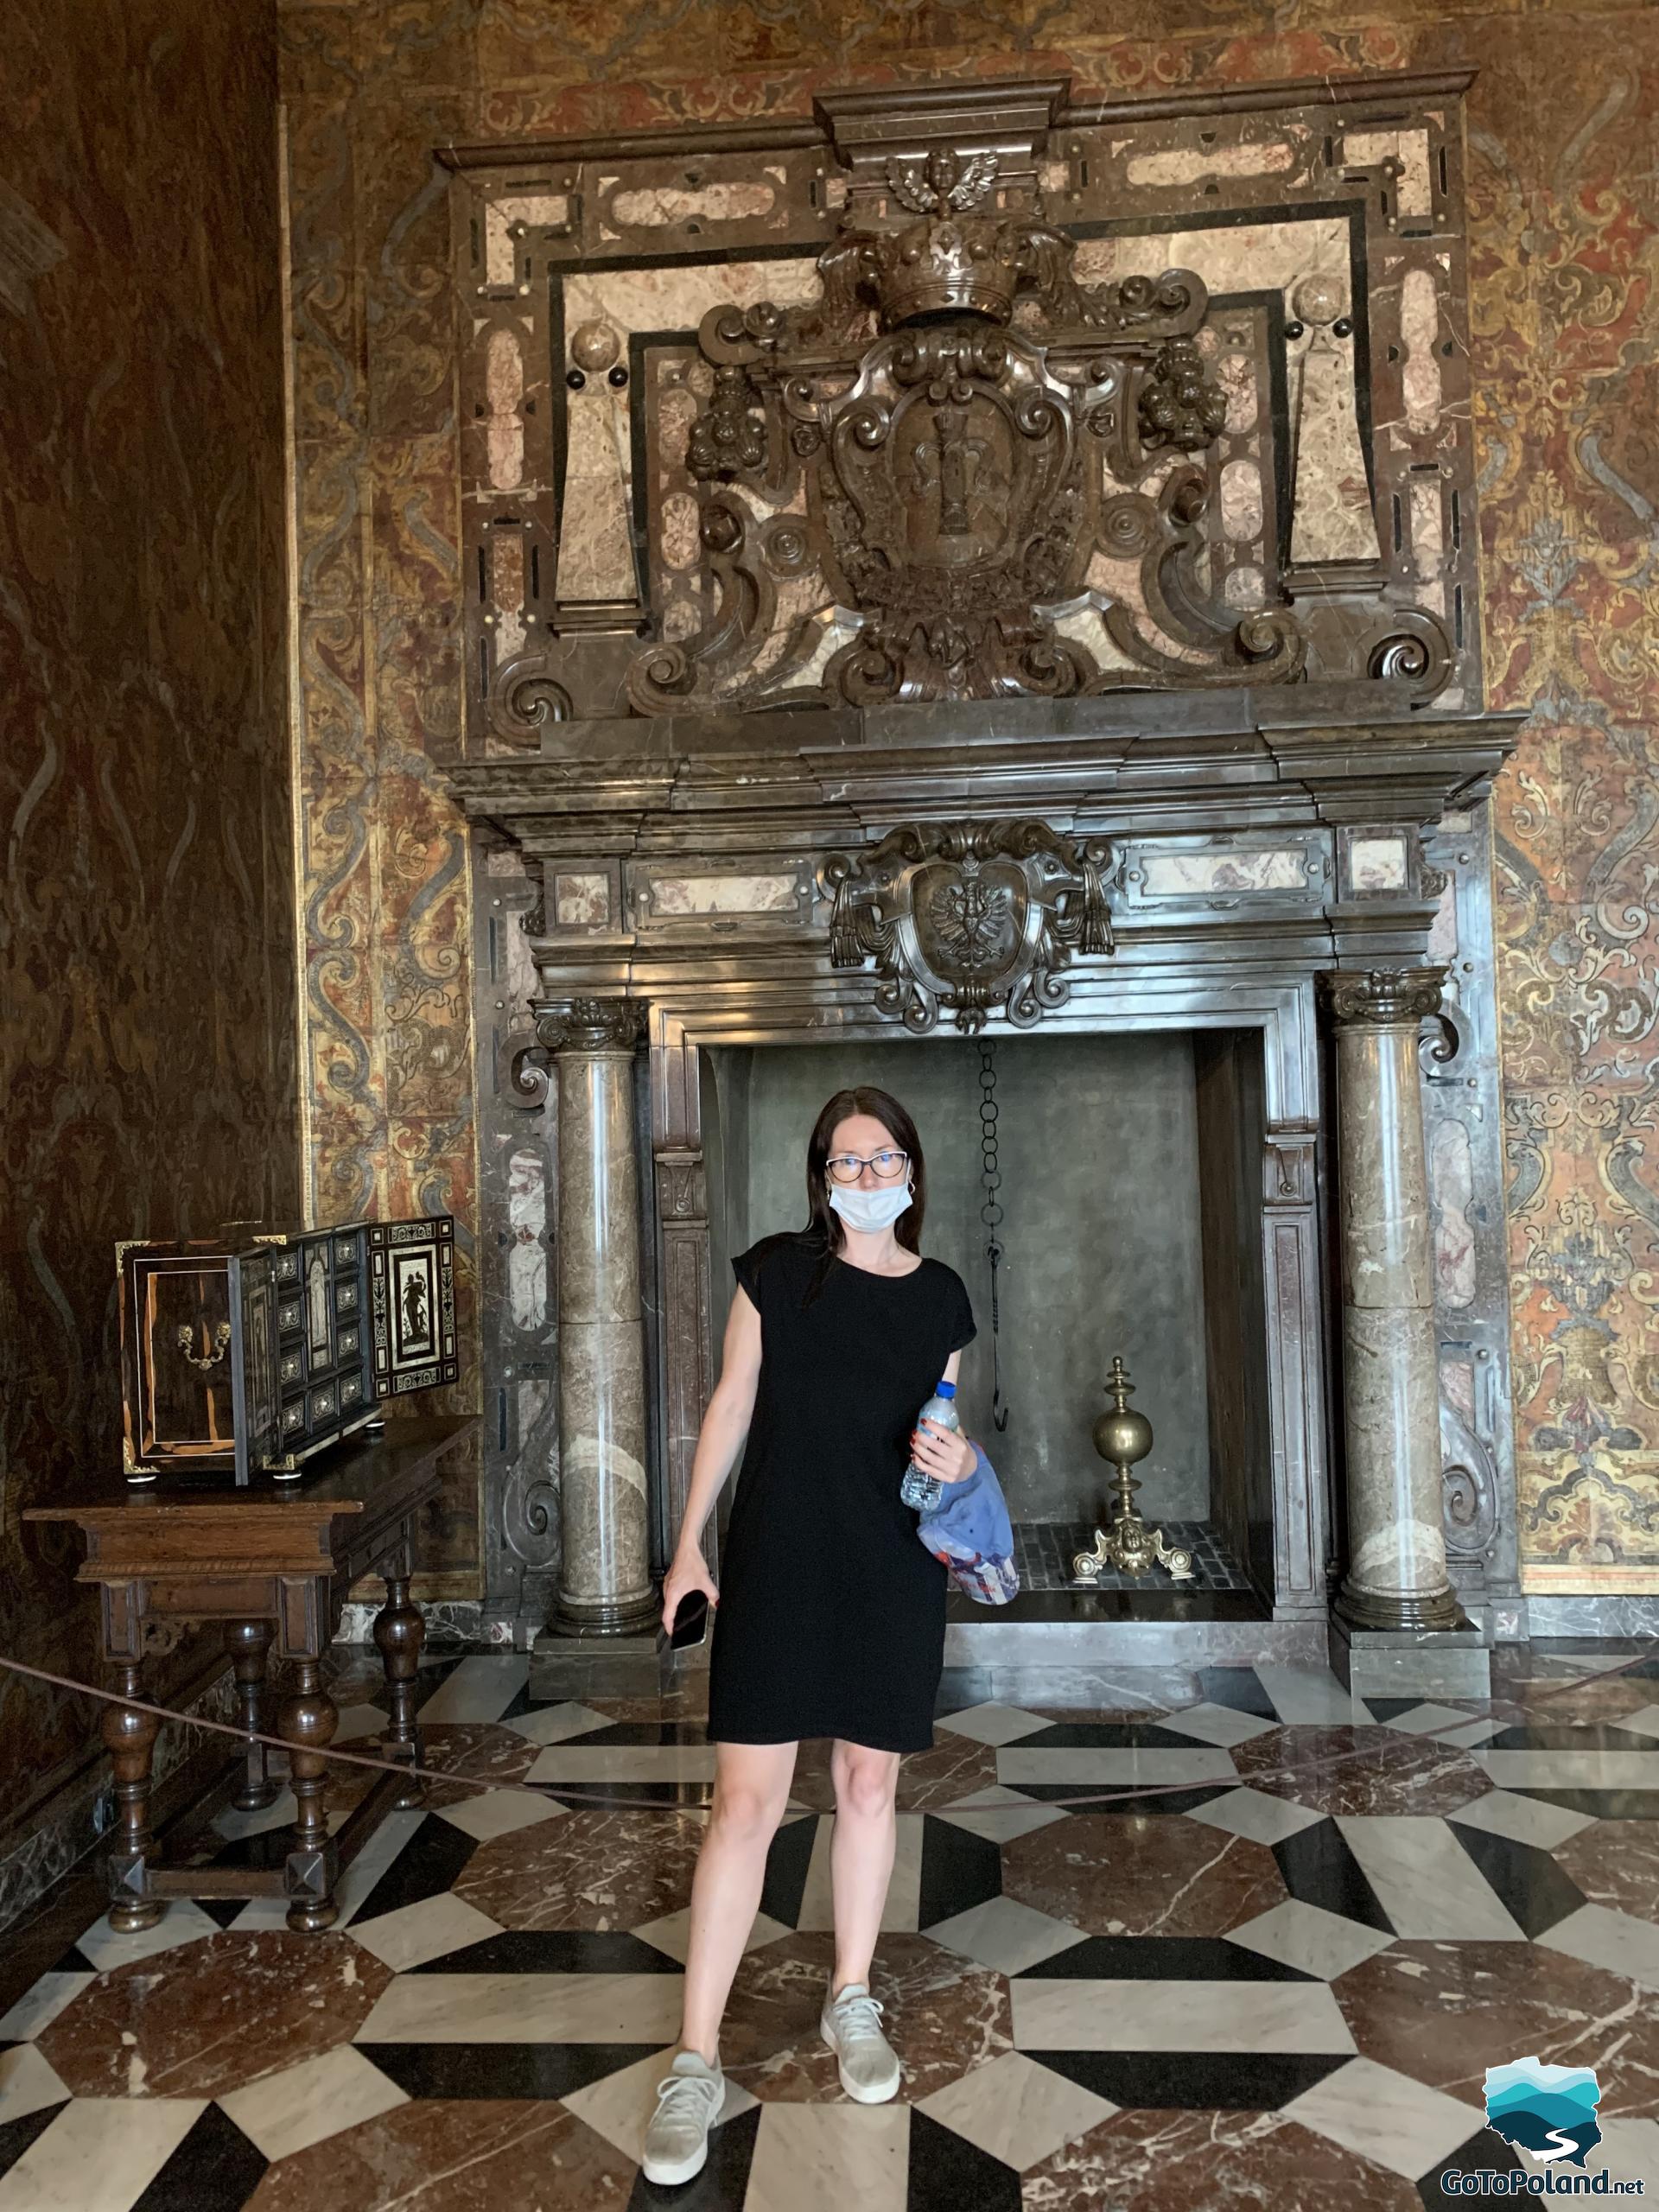 a woman is standing in a chamber in front of a decorative, large fireplace